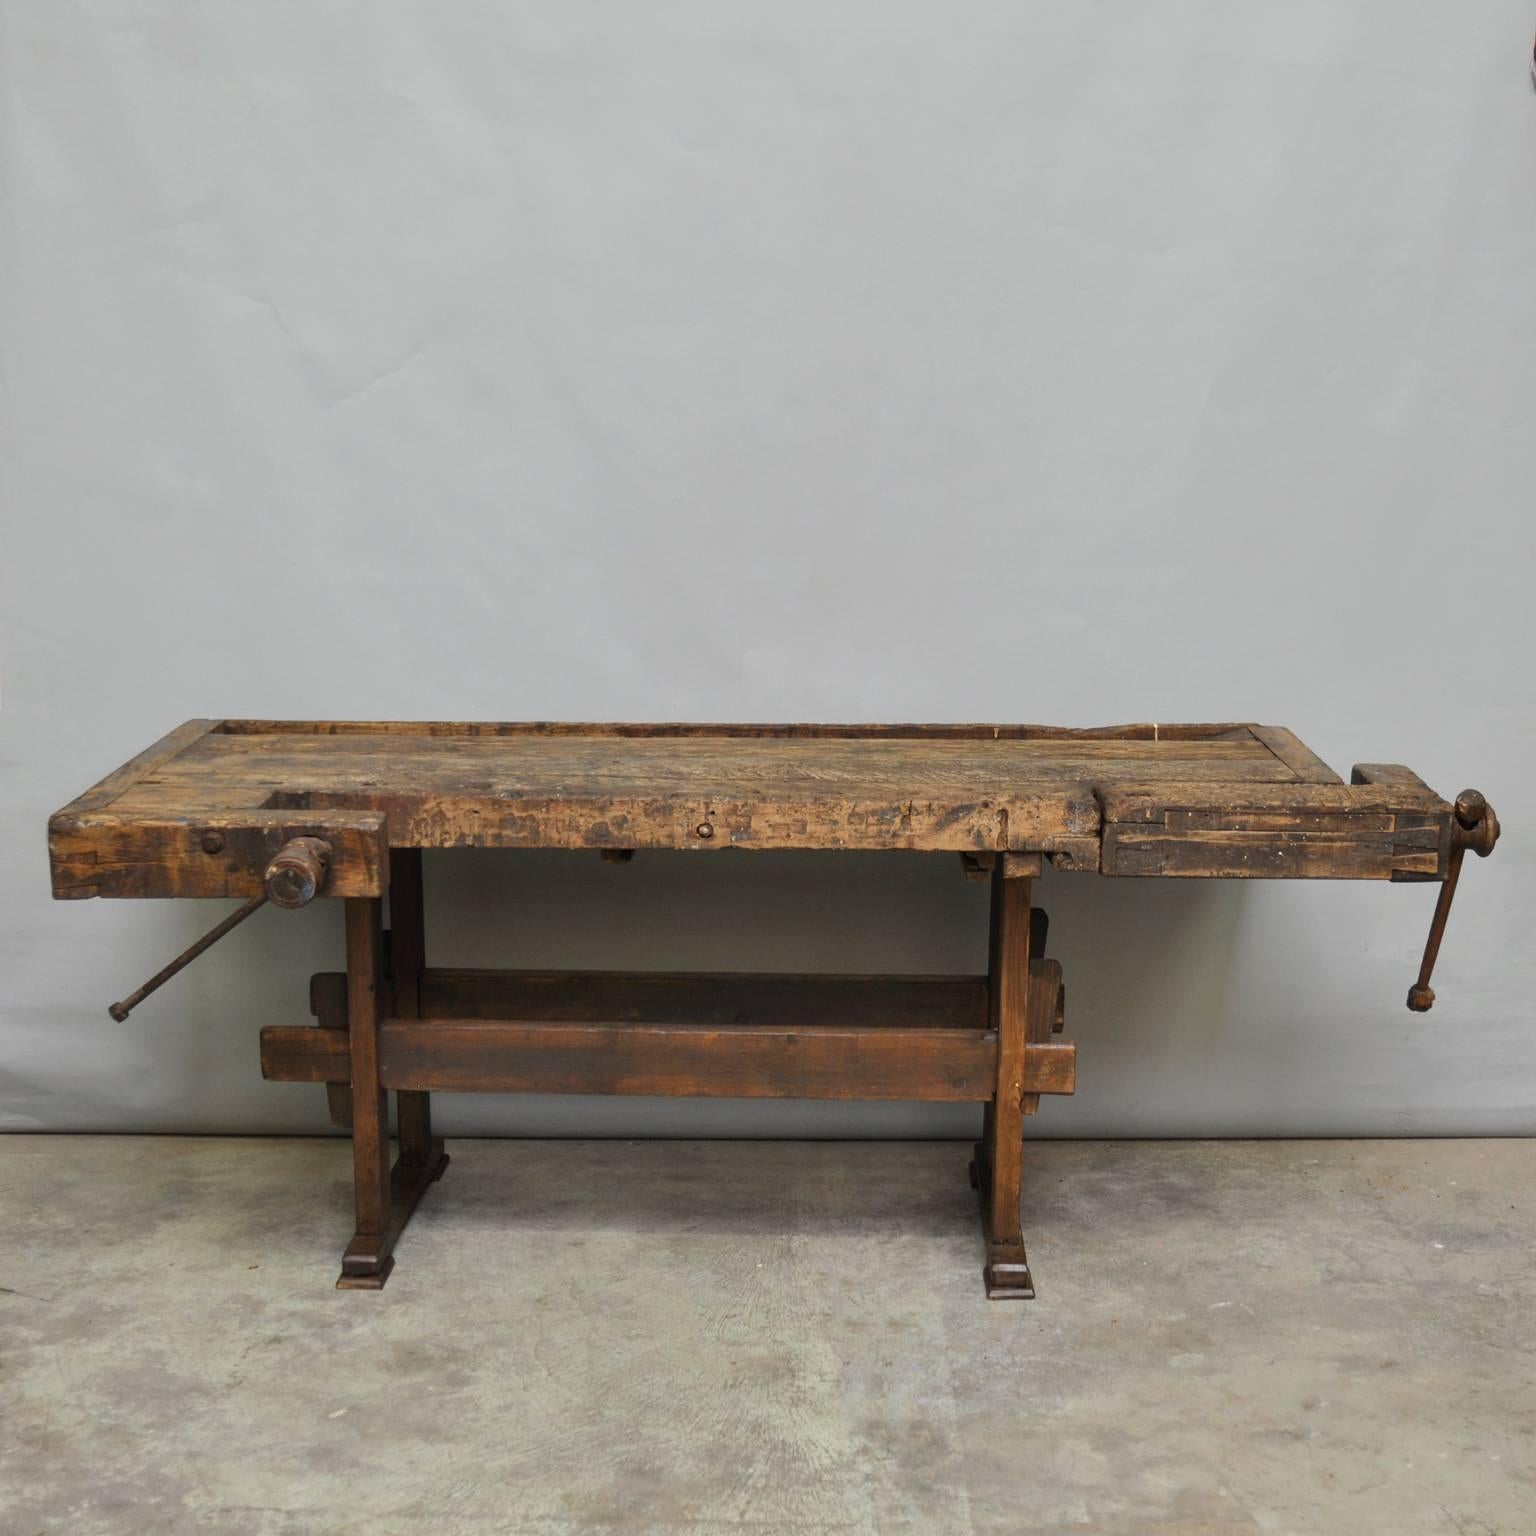 This vintage Hungarian carpenter’s workbench features two vices and a recessed tray where the carpenter would lay his tools. It was manufactured circa 1935.